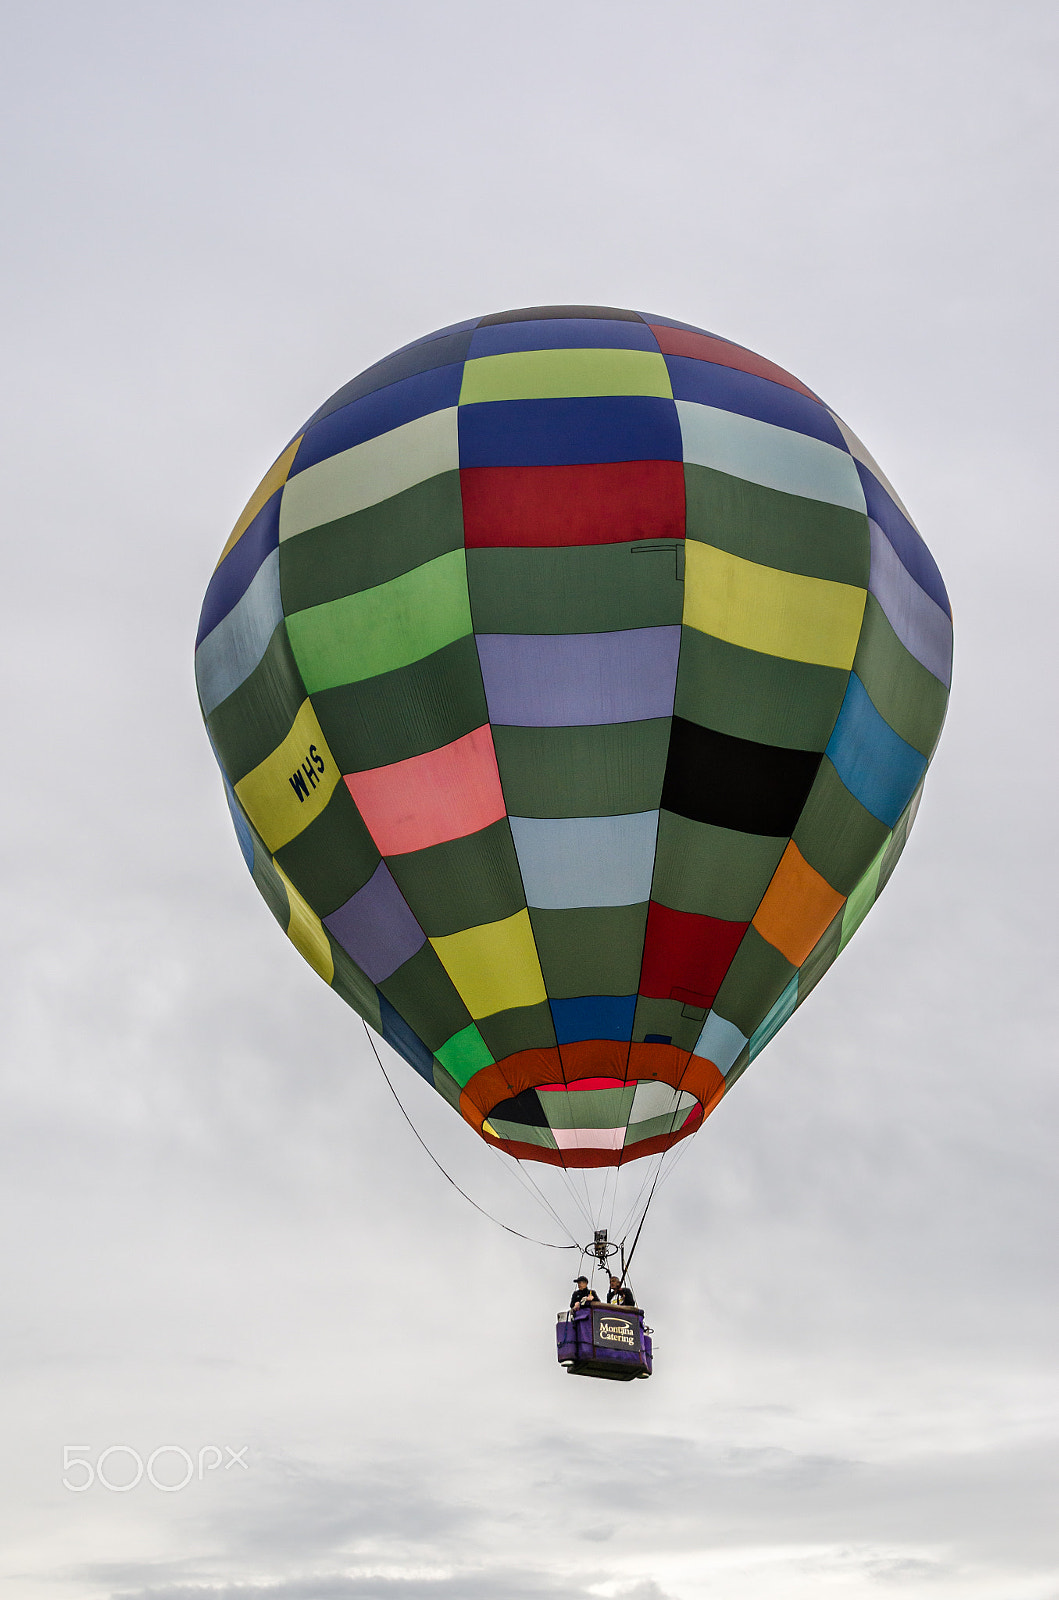 Nikon D7000 + Sigma 18-200mm F3.5-6.3 DC sample photo. Hamilton, new zealand - march 26, 2017: balloons over waikato festival on march 26, 2017 in... photography